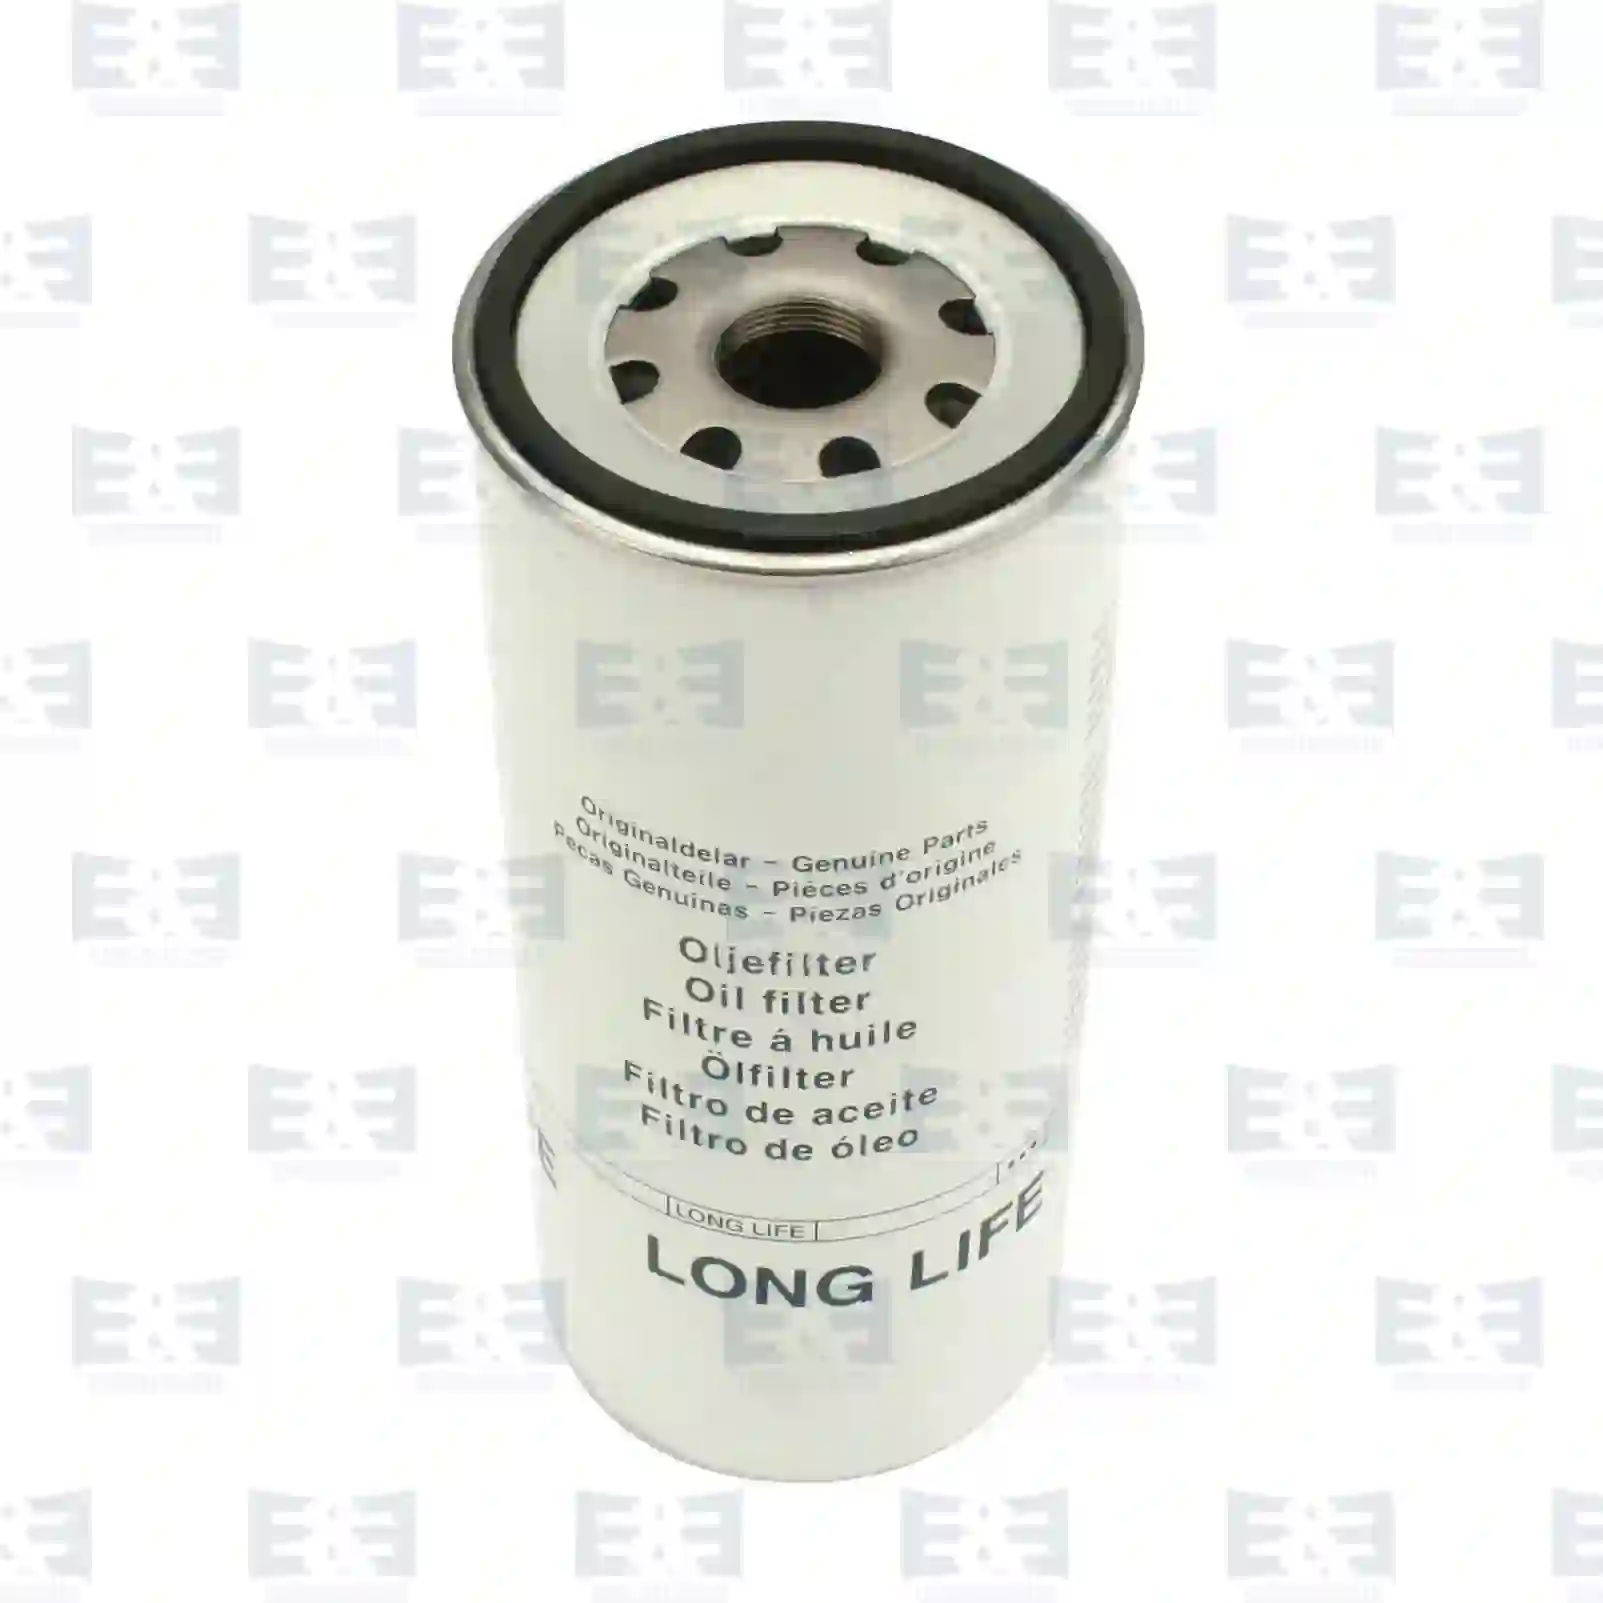 Oil Filter Oil filter, long life, EE No 2E2200017 ,  oem no:2191P551807, 21939298, 485GB3236, 7423114226, 21170569, 21707133, 478736, 85114049, ZG01725-0008 E&E Truck Spare Parts | Truck Spare Parts, Auotomotive Spare Parts